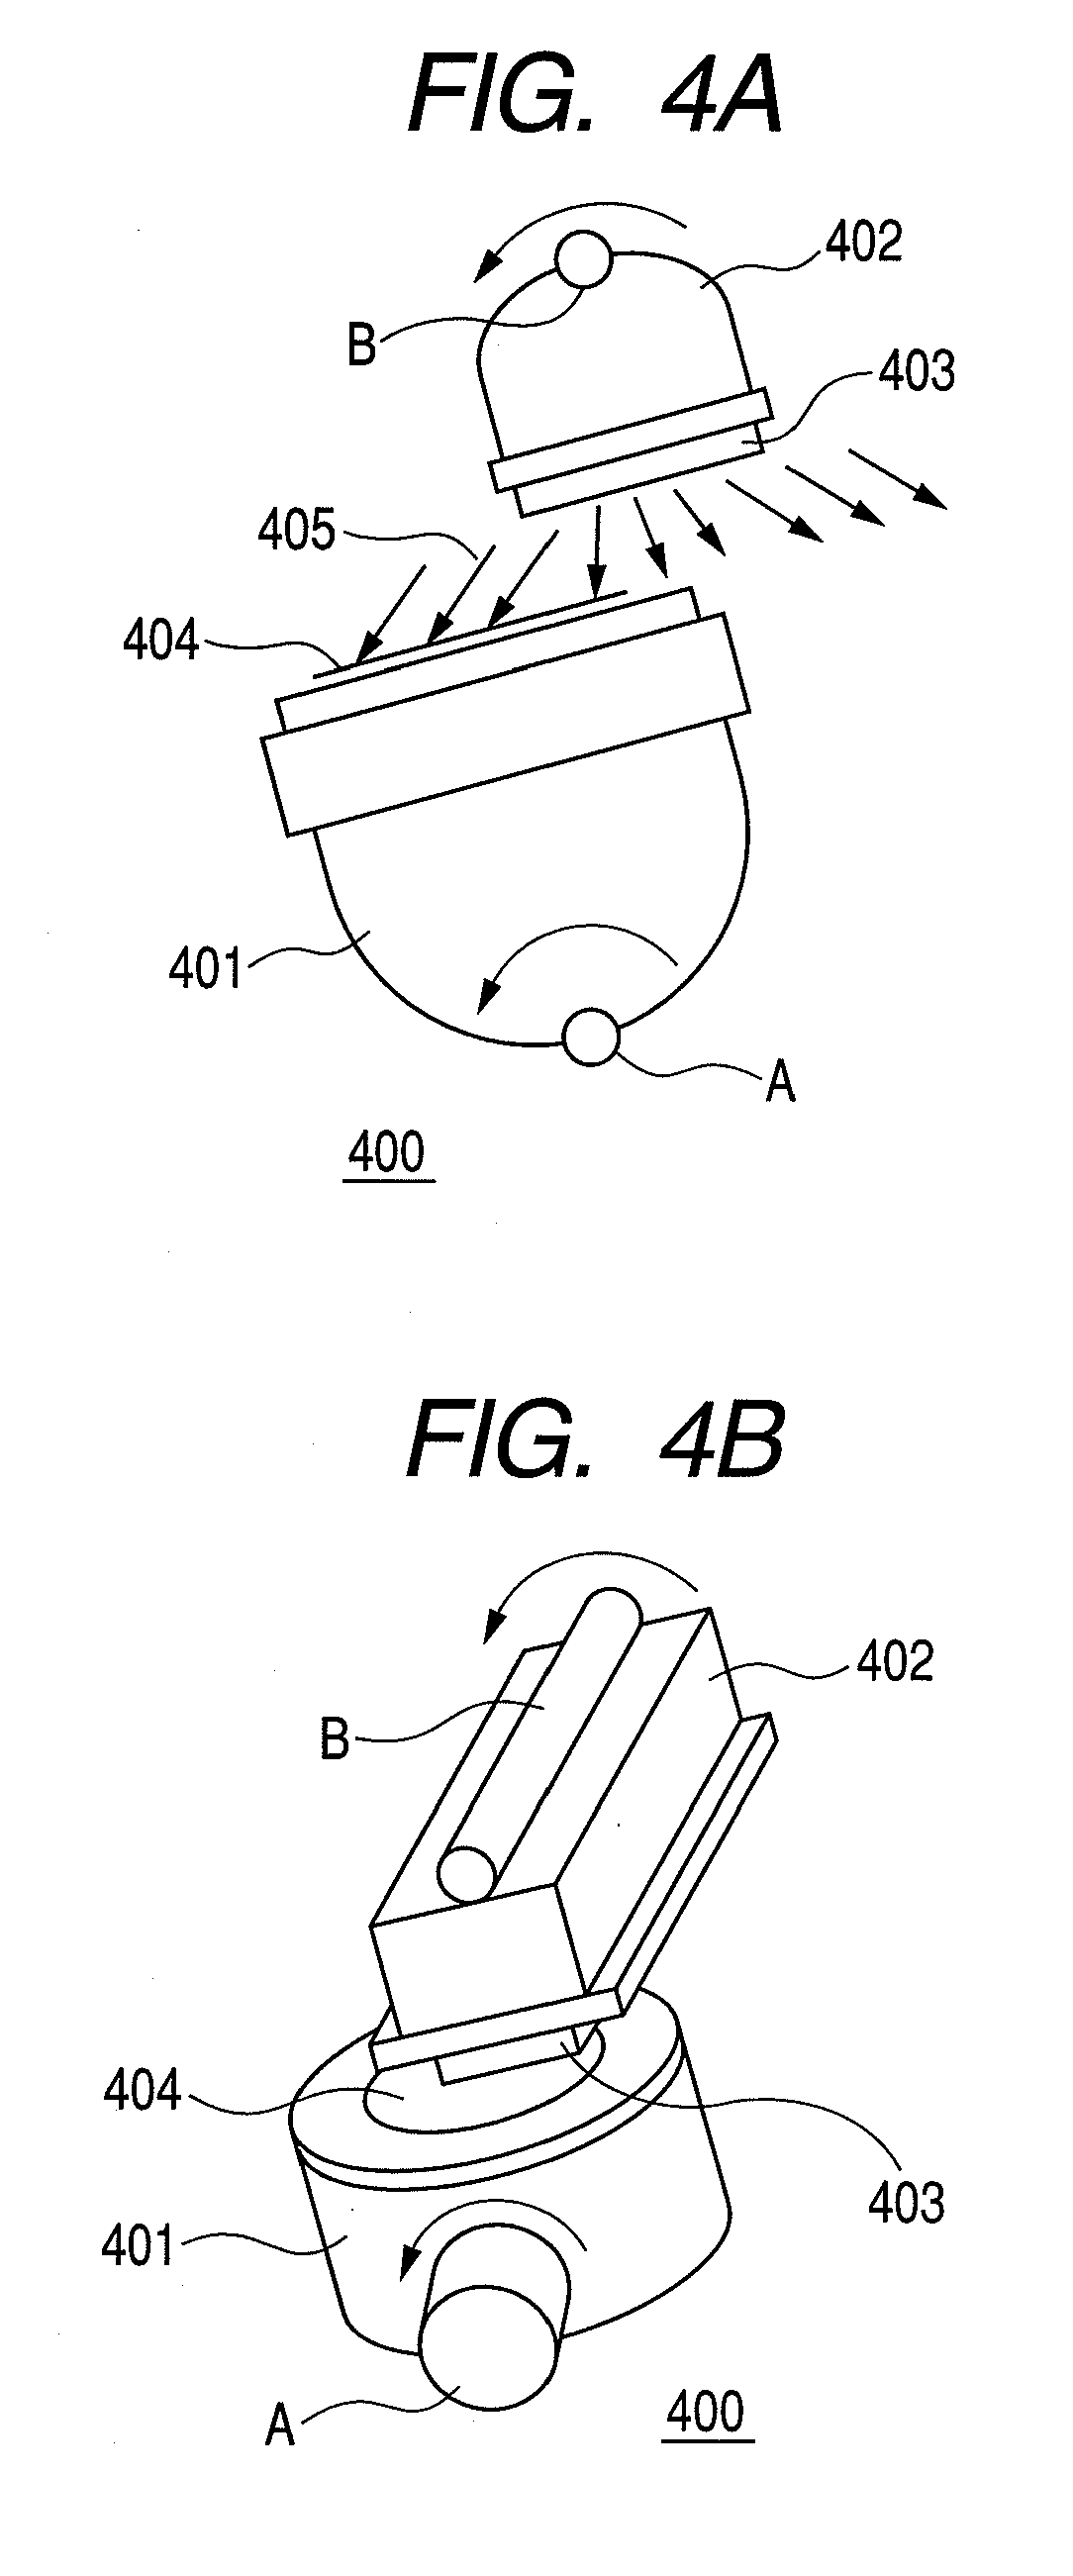 Film forming method by sputtering and sputtering apparatus thereof